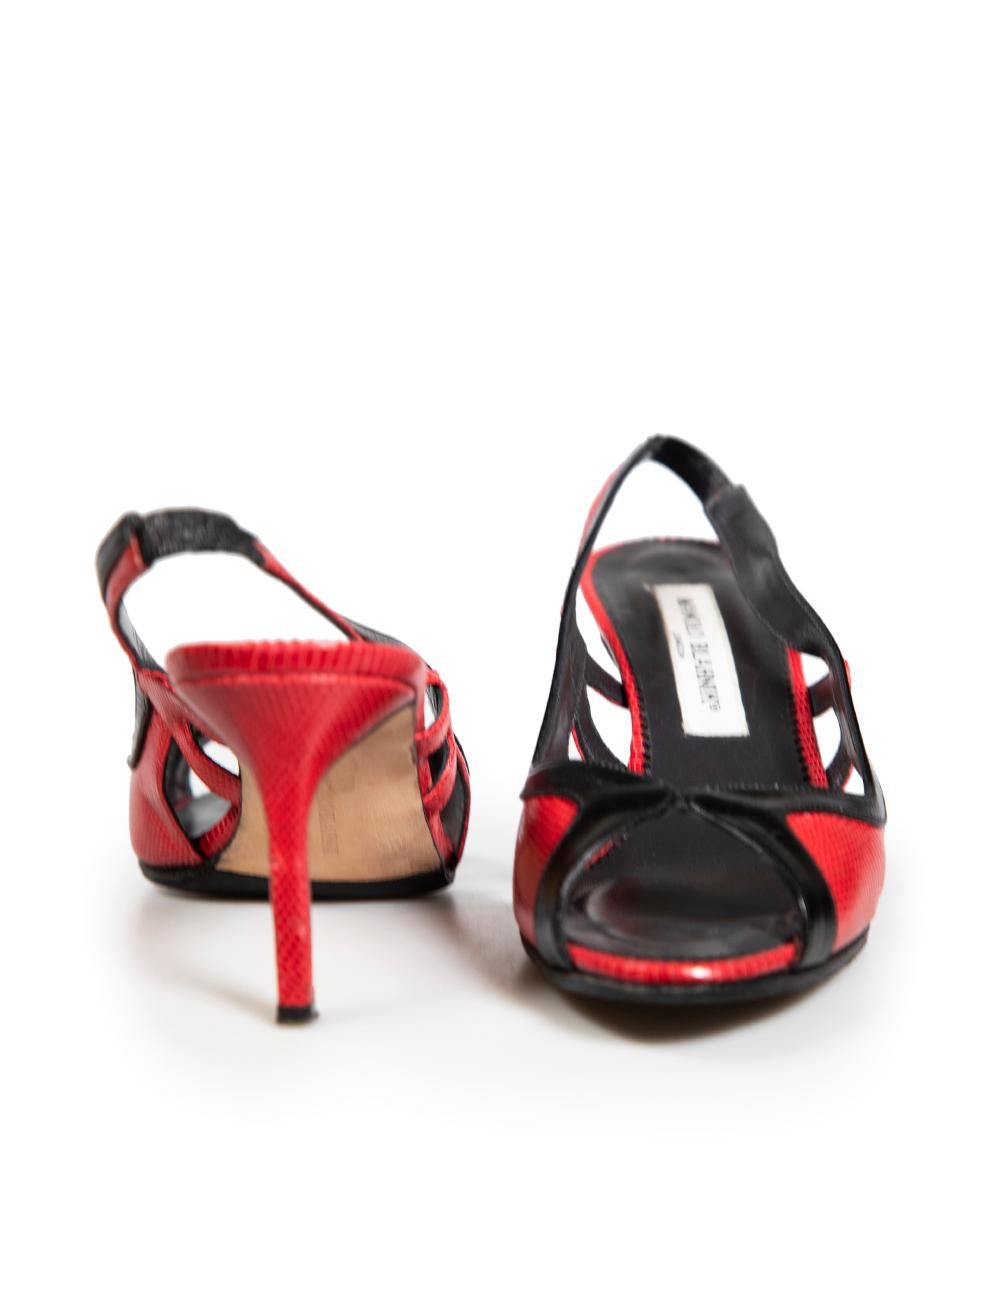 Manolo Blahnik Red & Black Leather Slingback Sandals Size IT 38 In Good Condition For Sale In London, GB